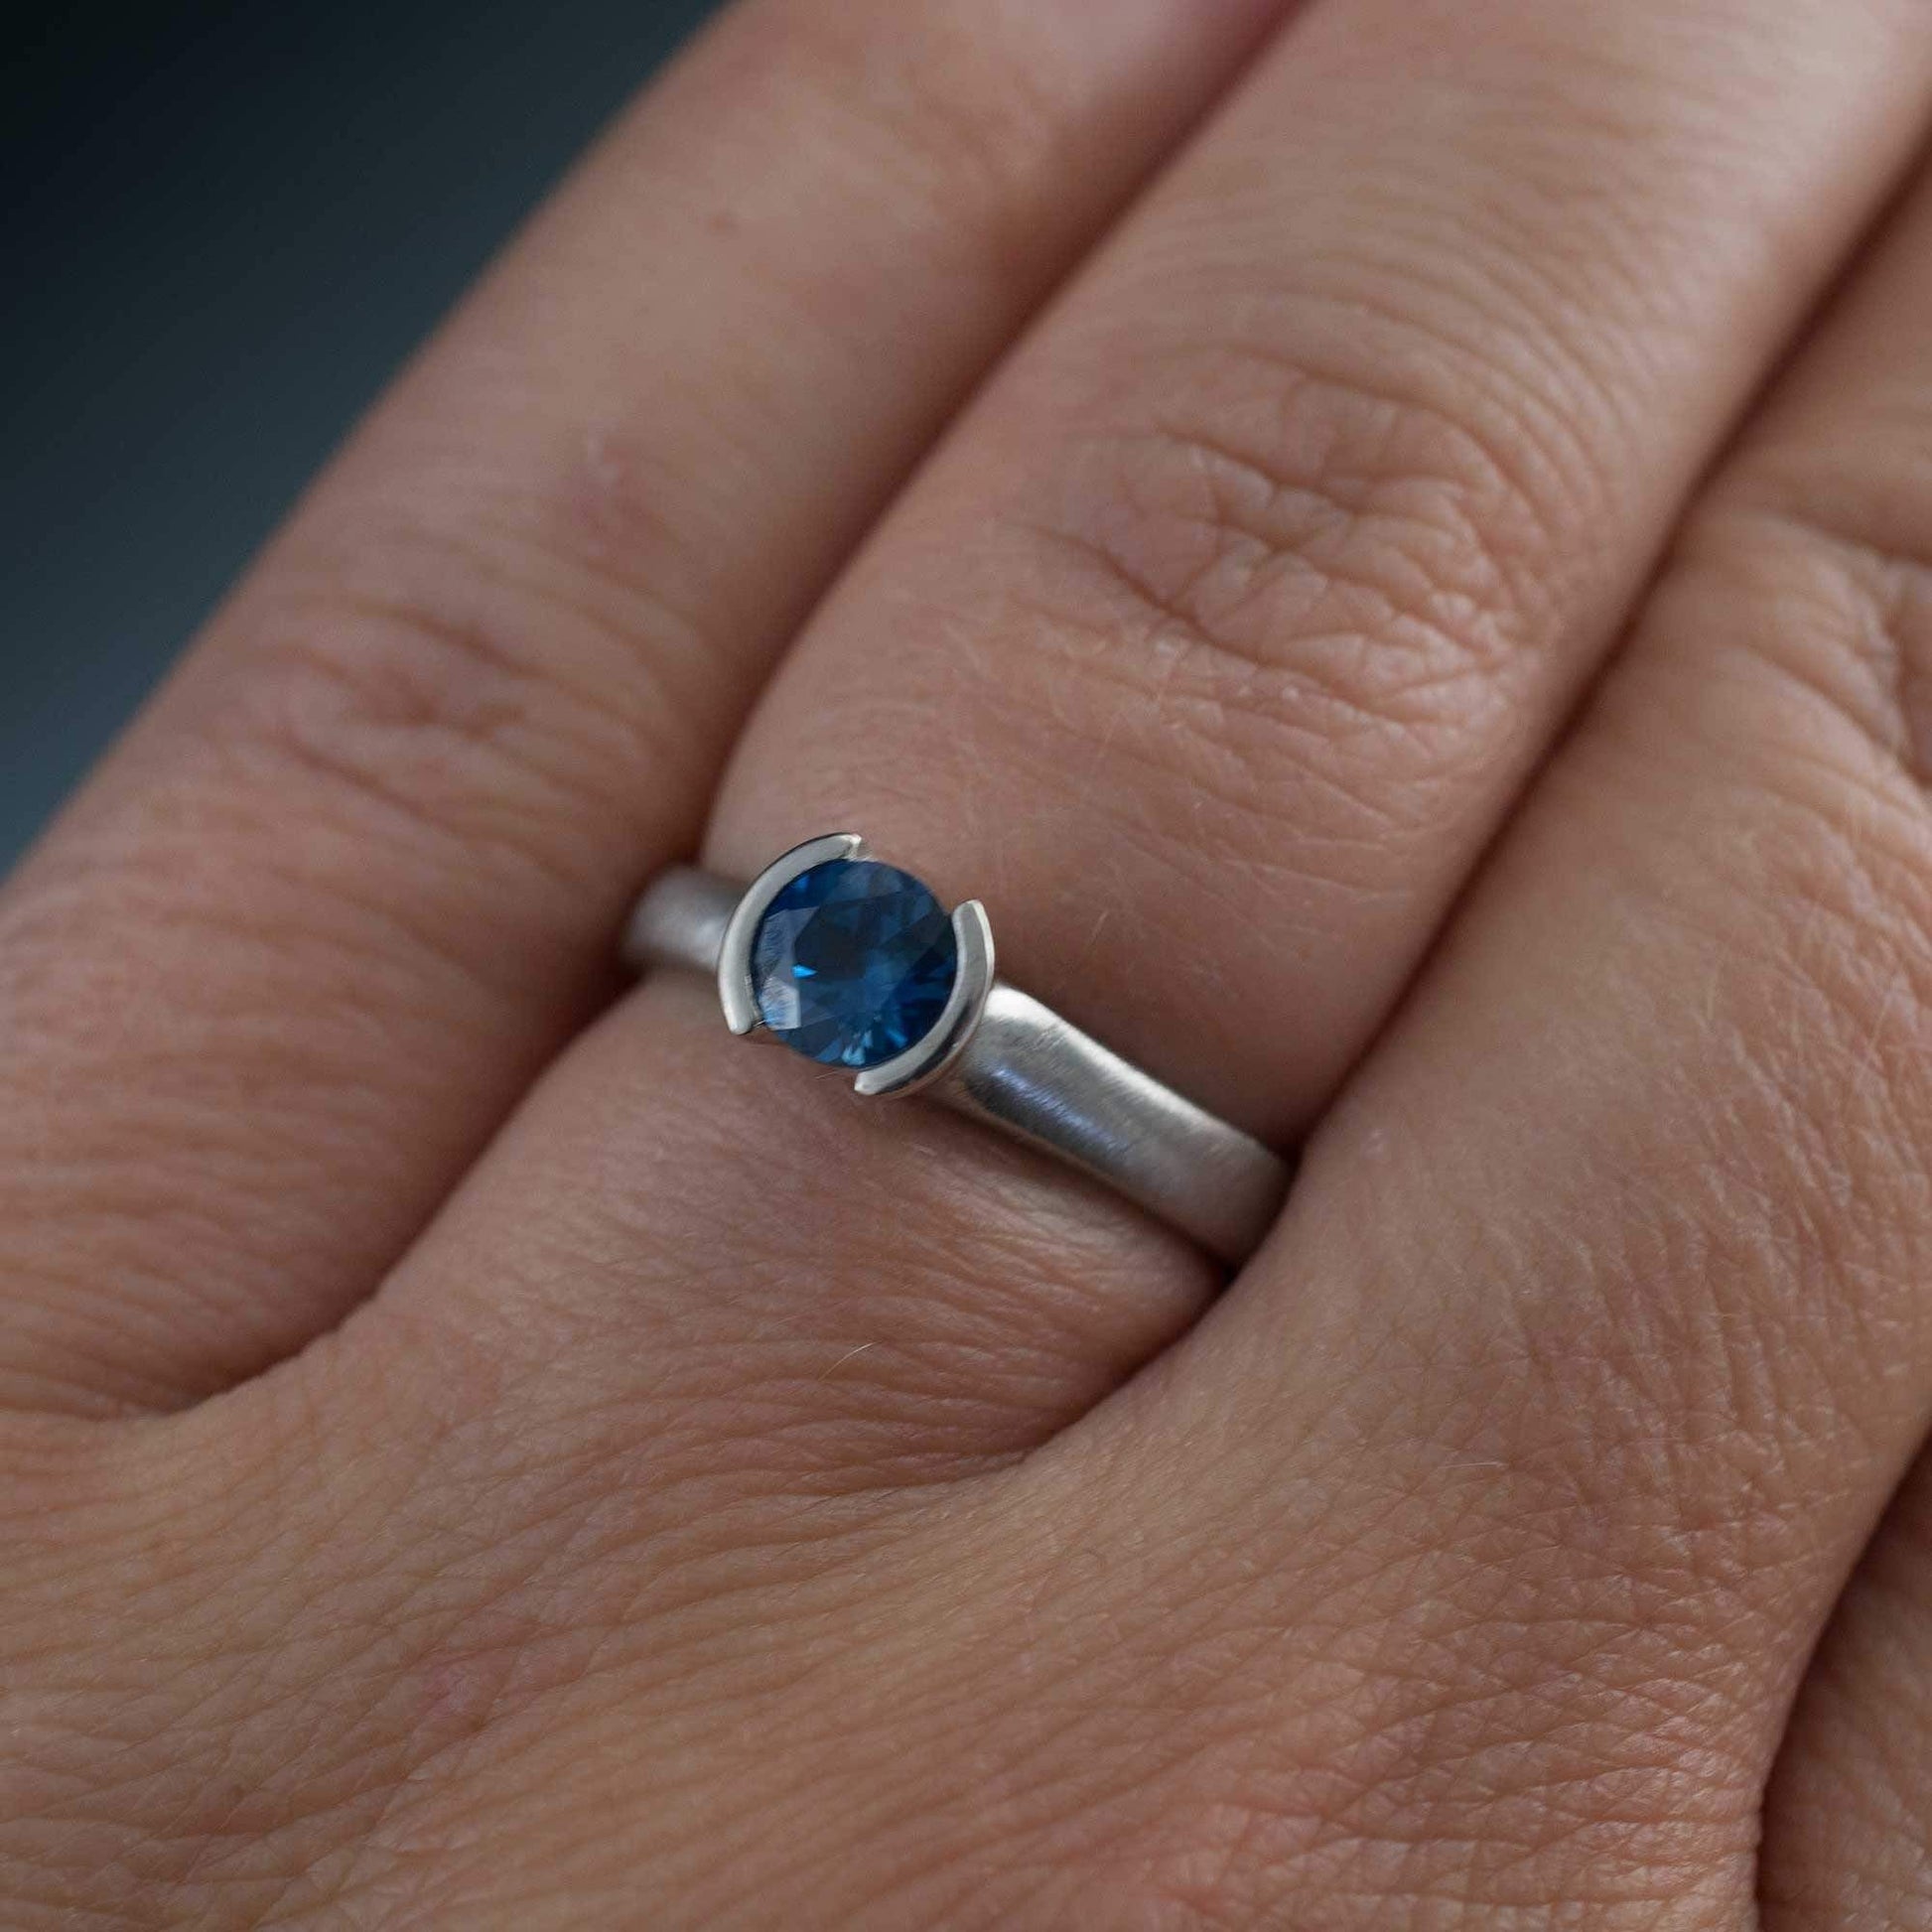 Round Fair Trade Blue Teal Blue Malawi Sapphire Half Bezel Solitaire Engagement Ring Ring by Nodeform